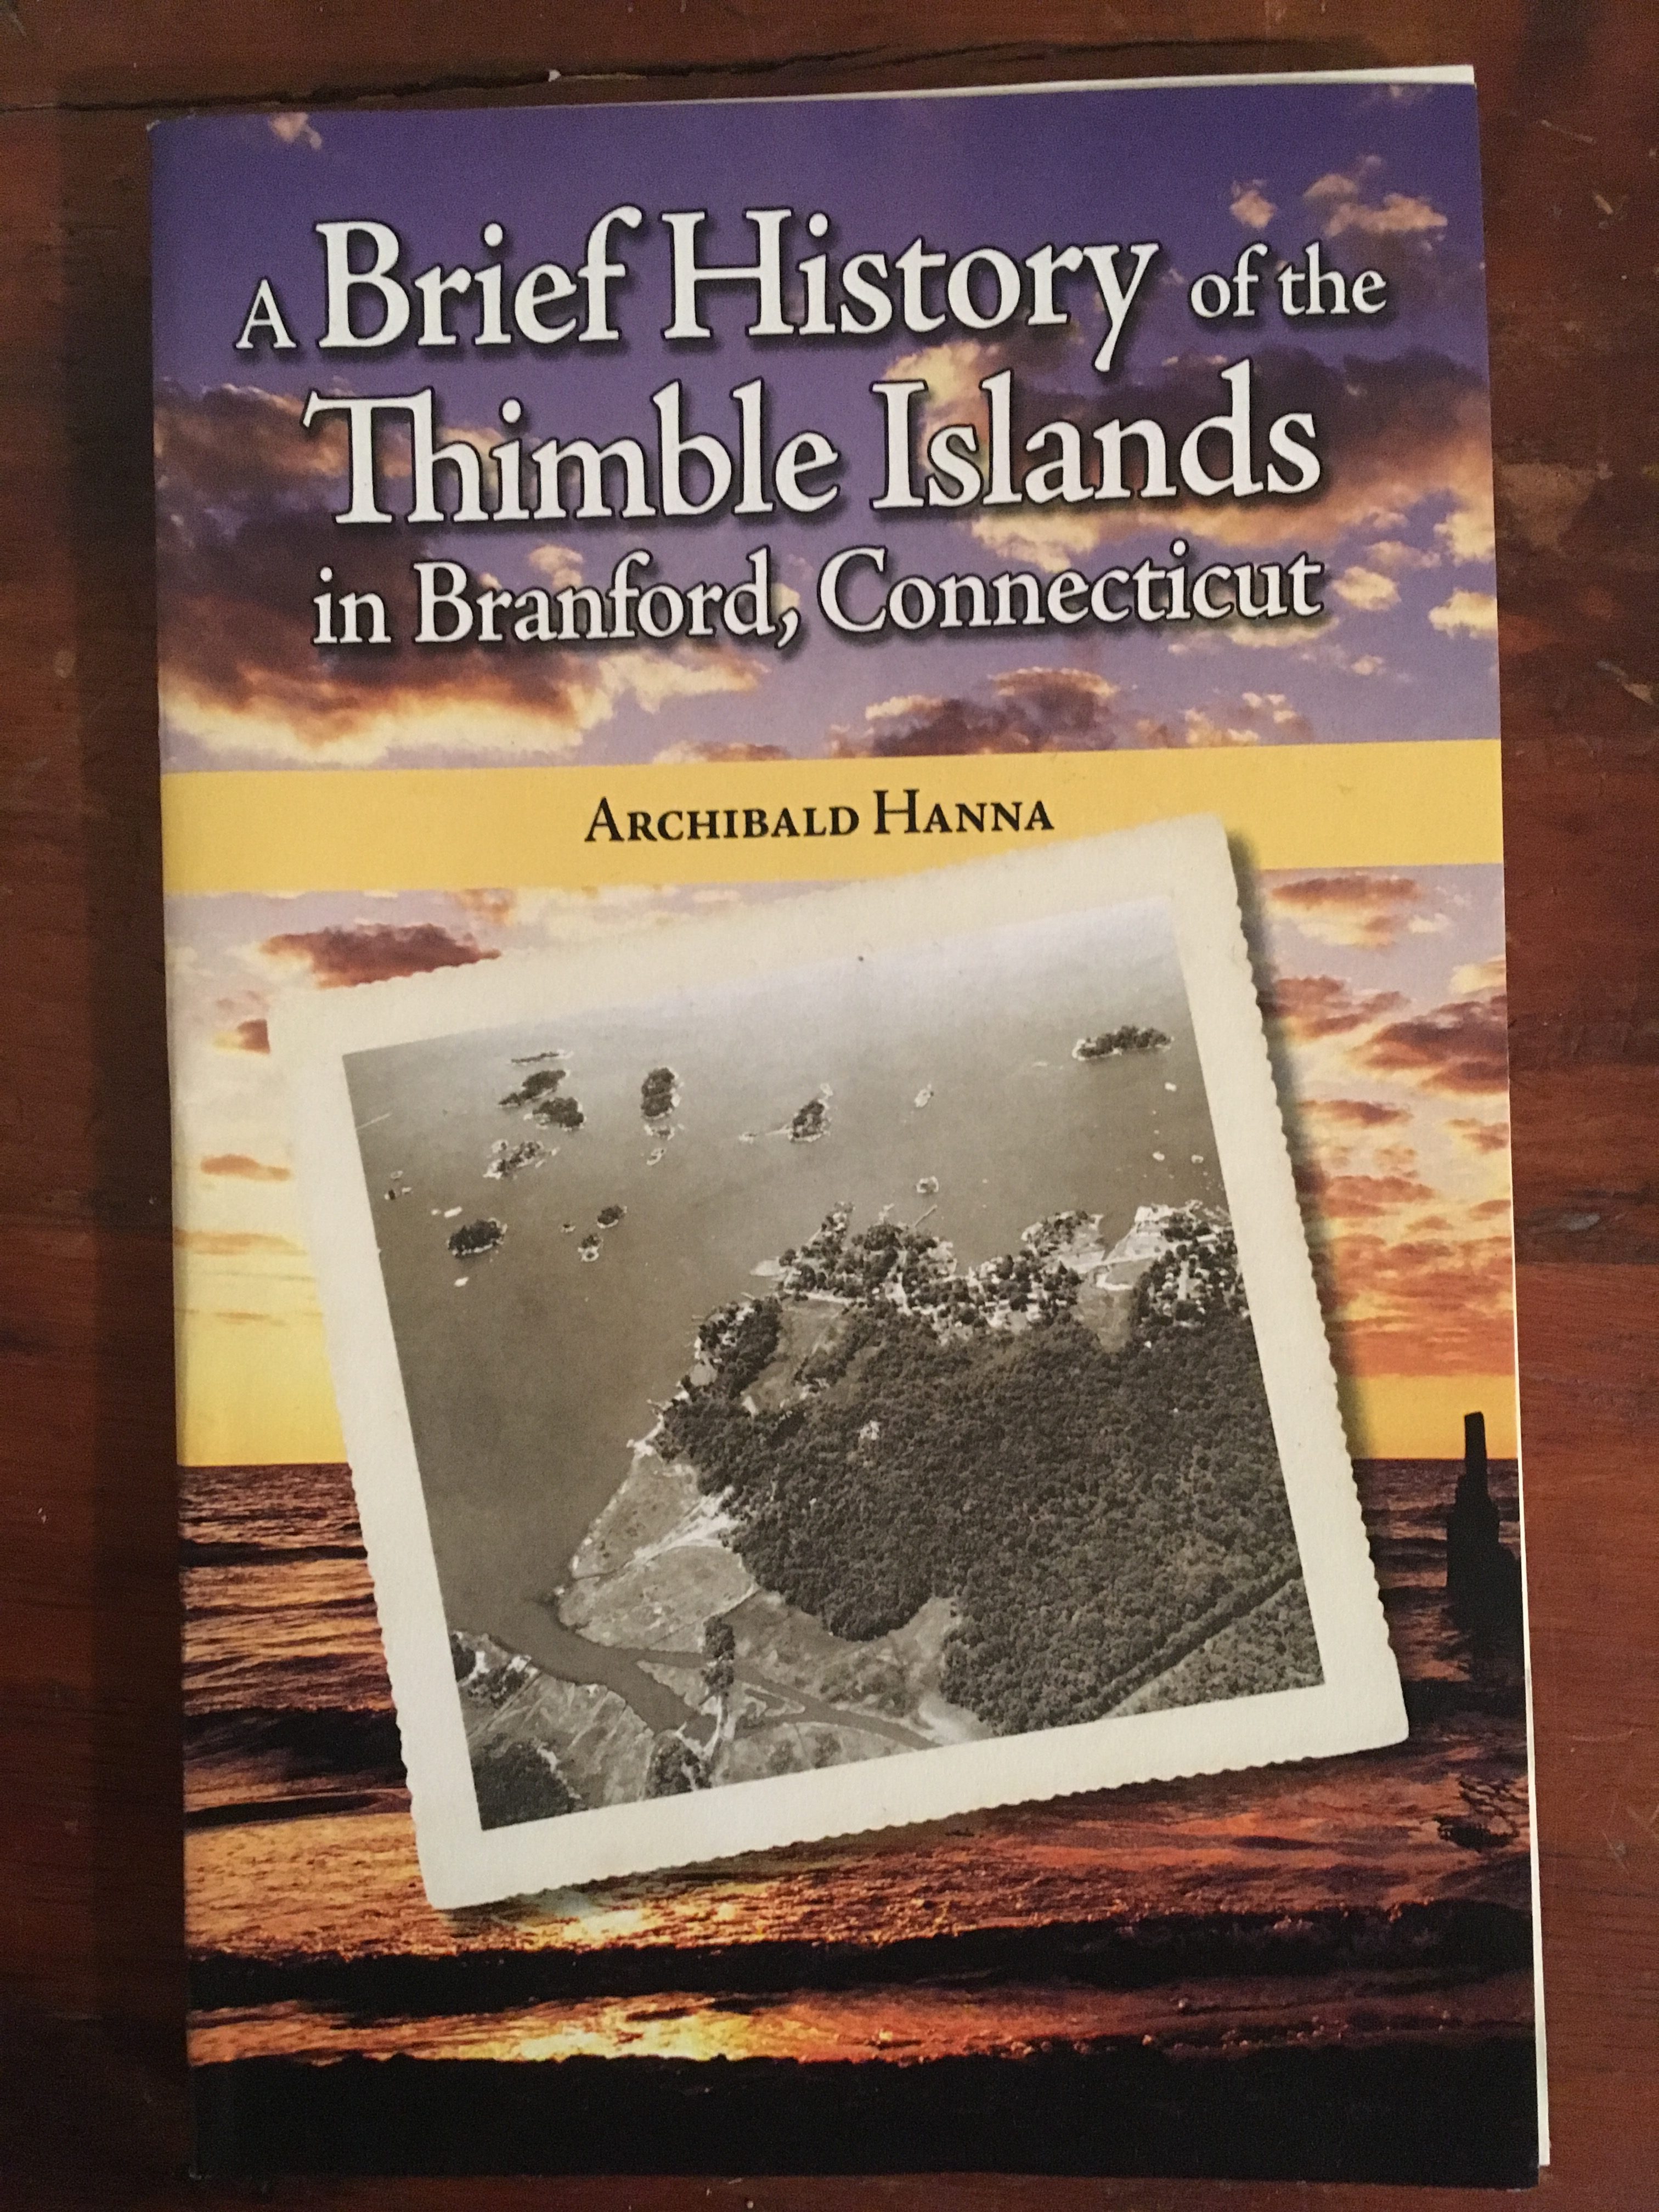 A Brief History of the Thimble Islands